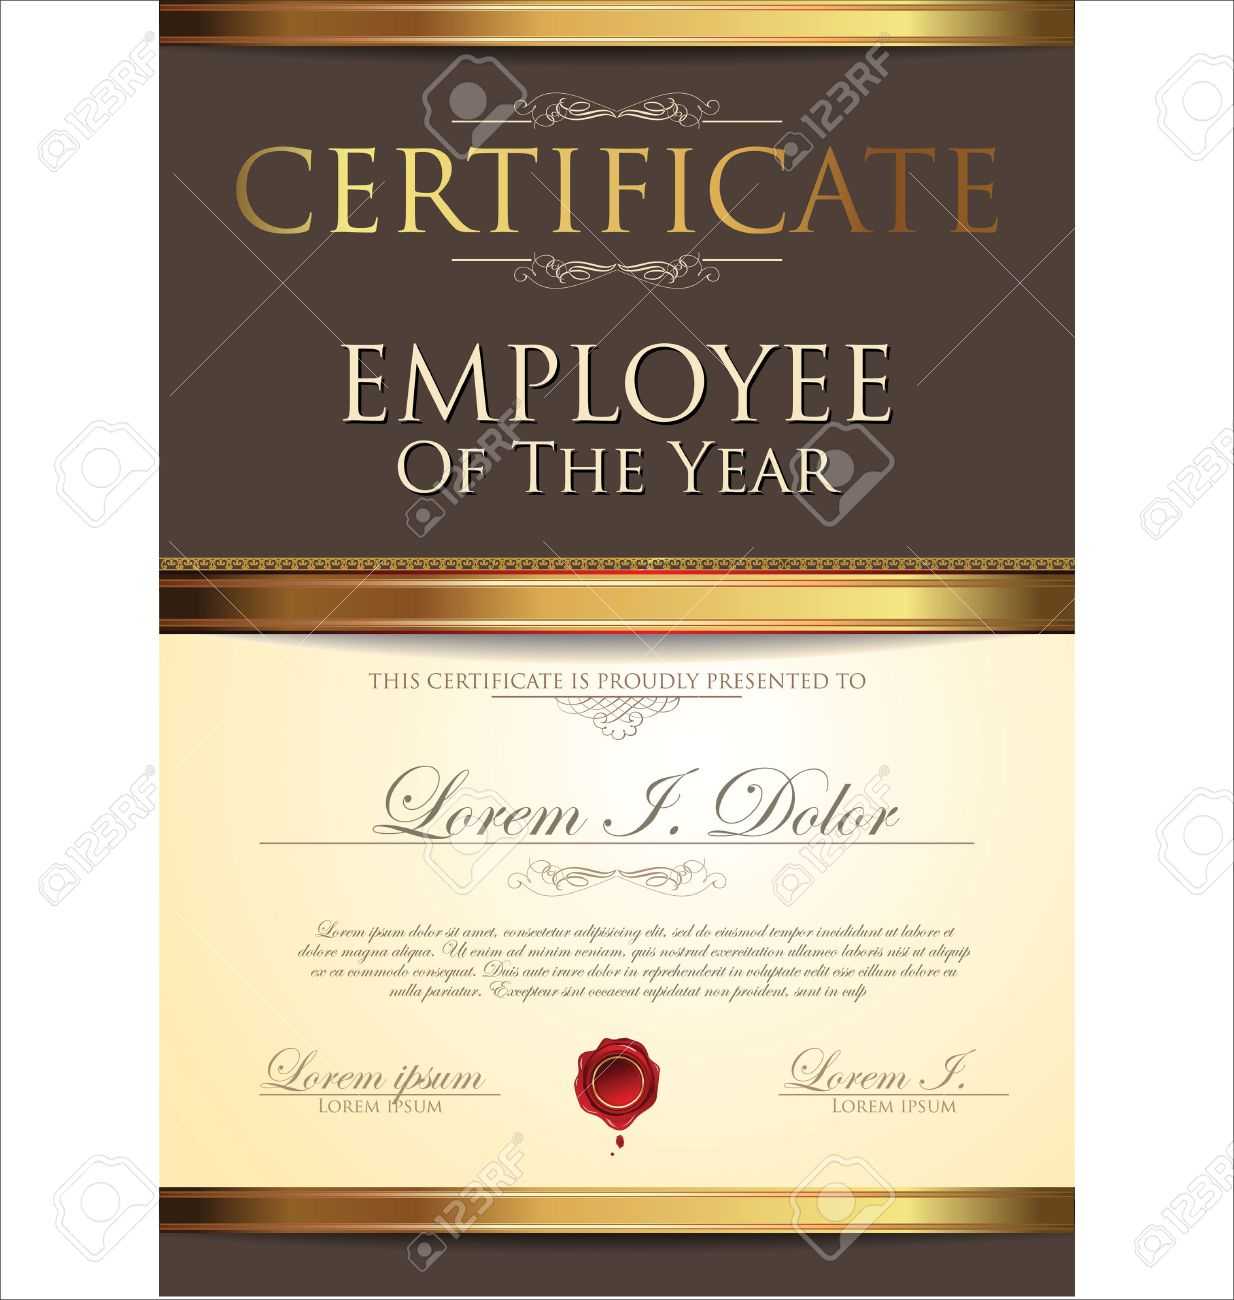 Certificate Template, Employee Of The Year Pertaining To Employee Of The Year Certificate Template Free